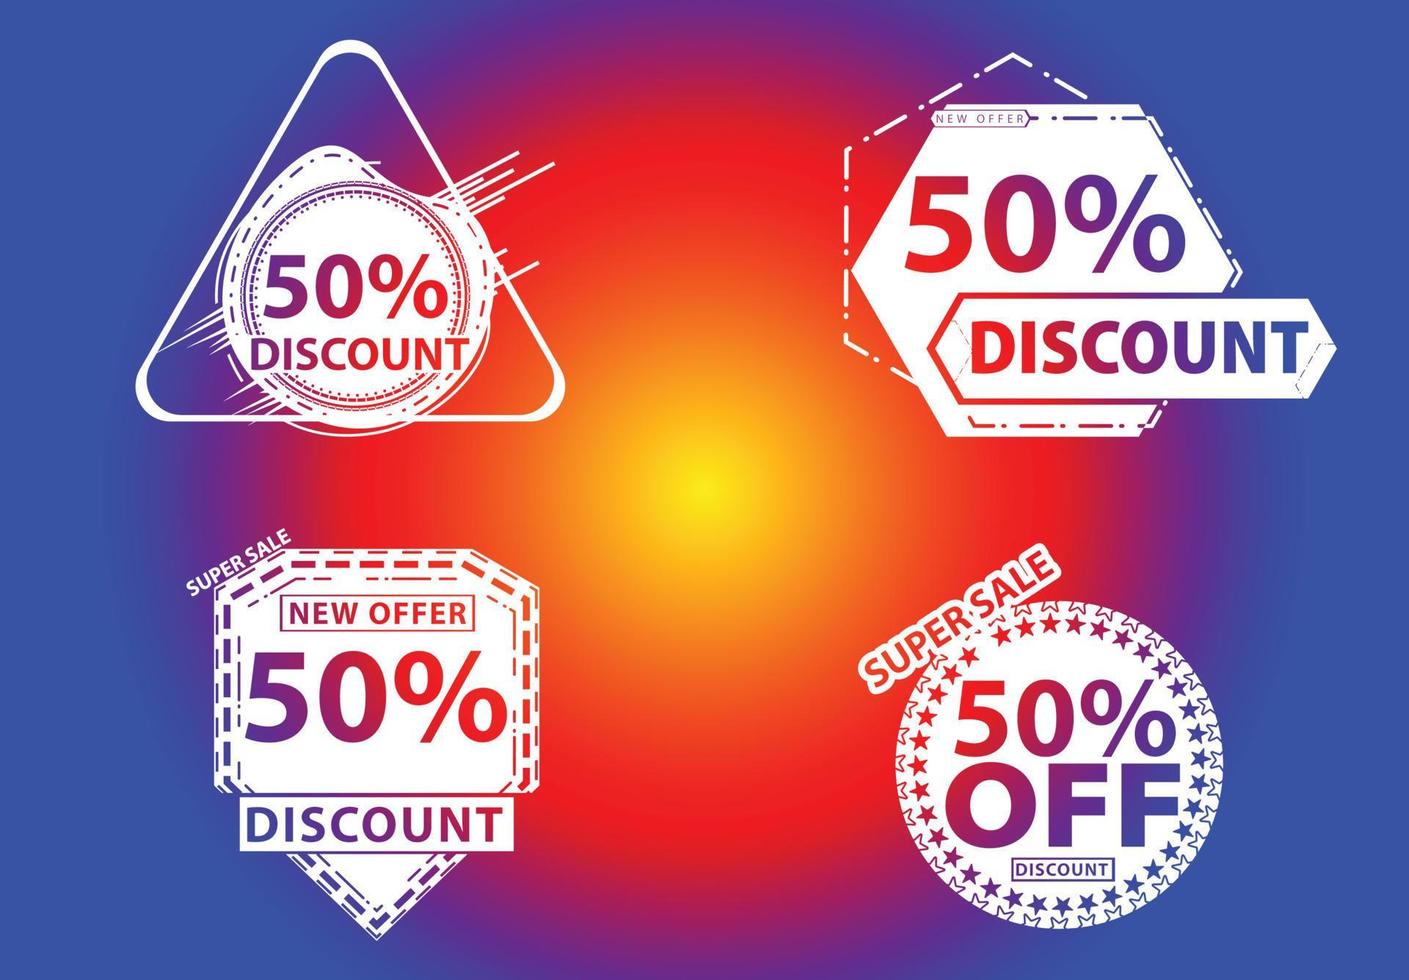 50 percent off new offer logo and icon design template vector